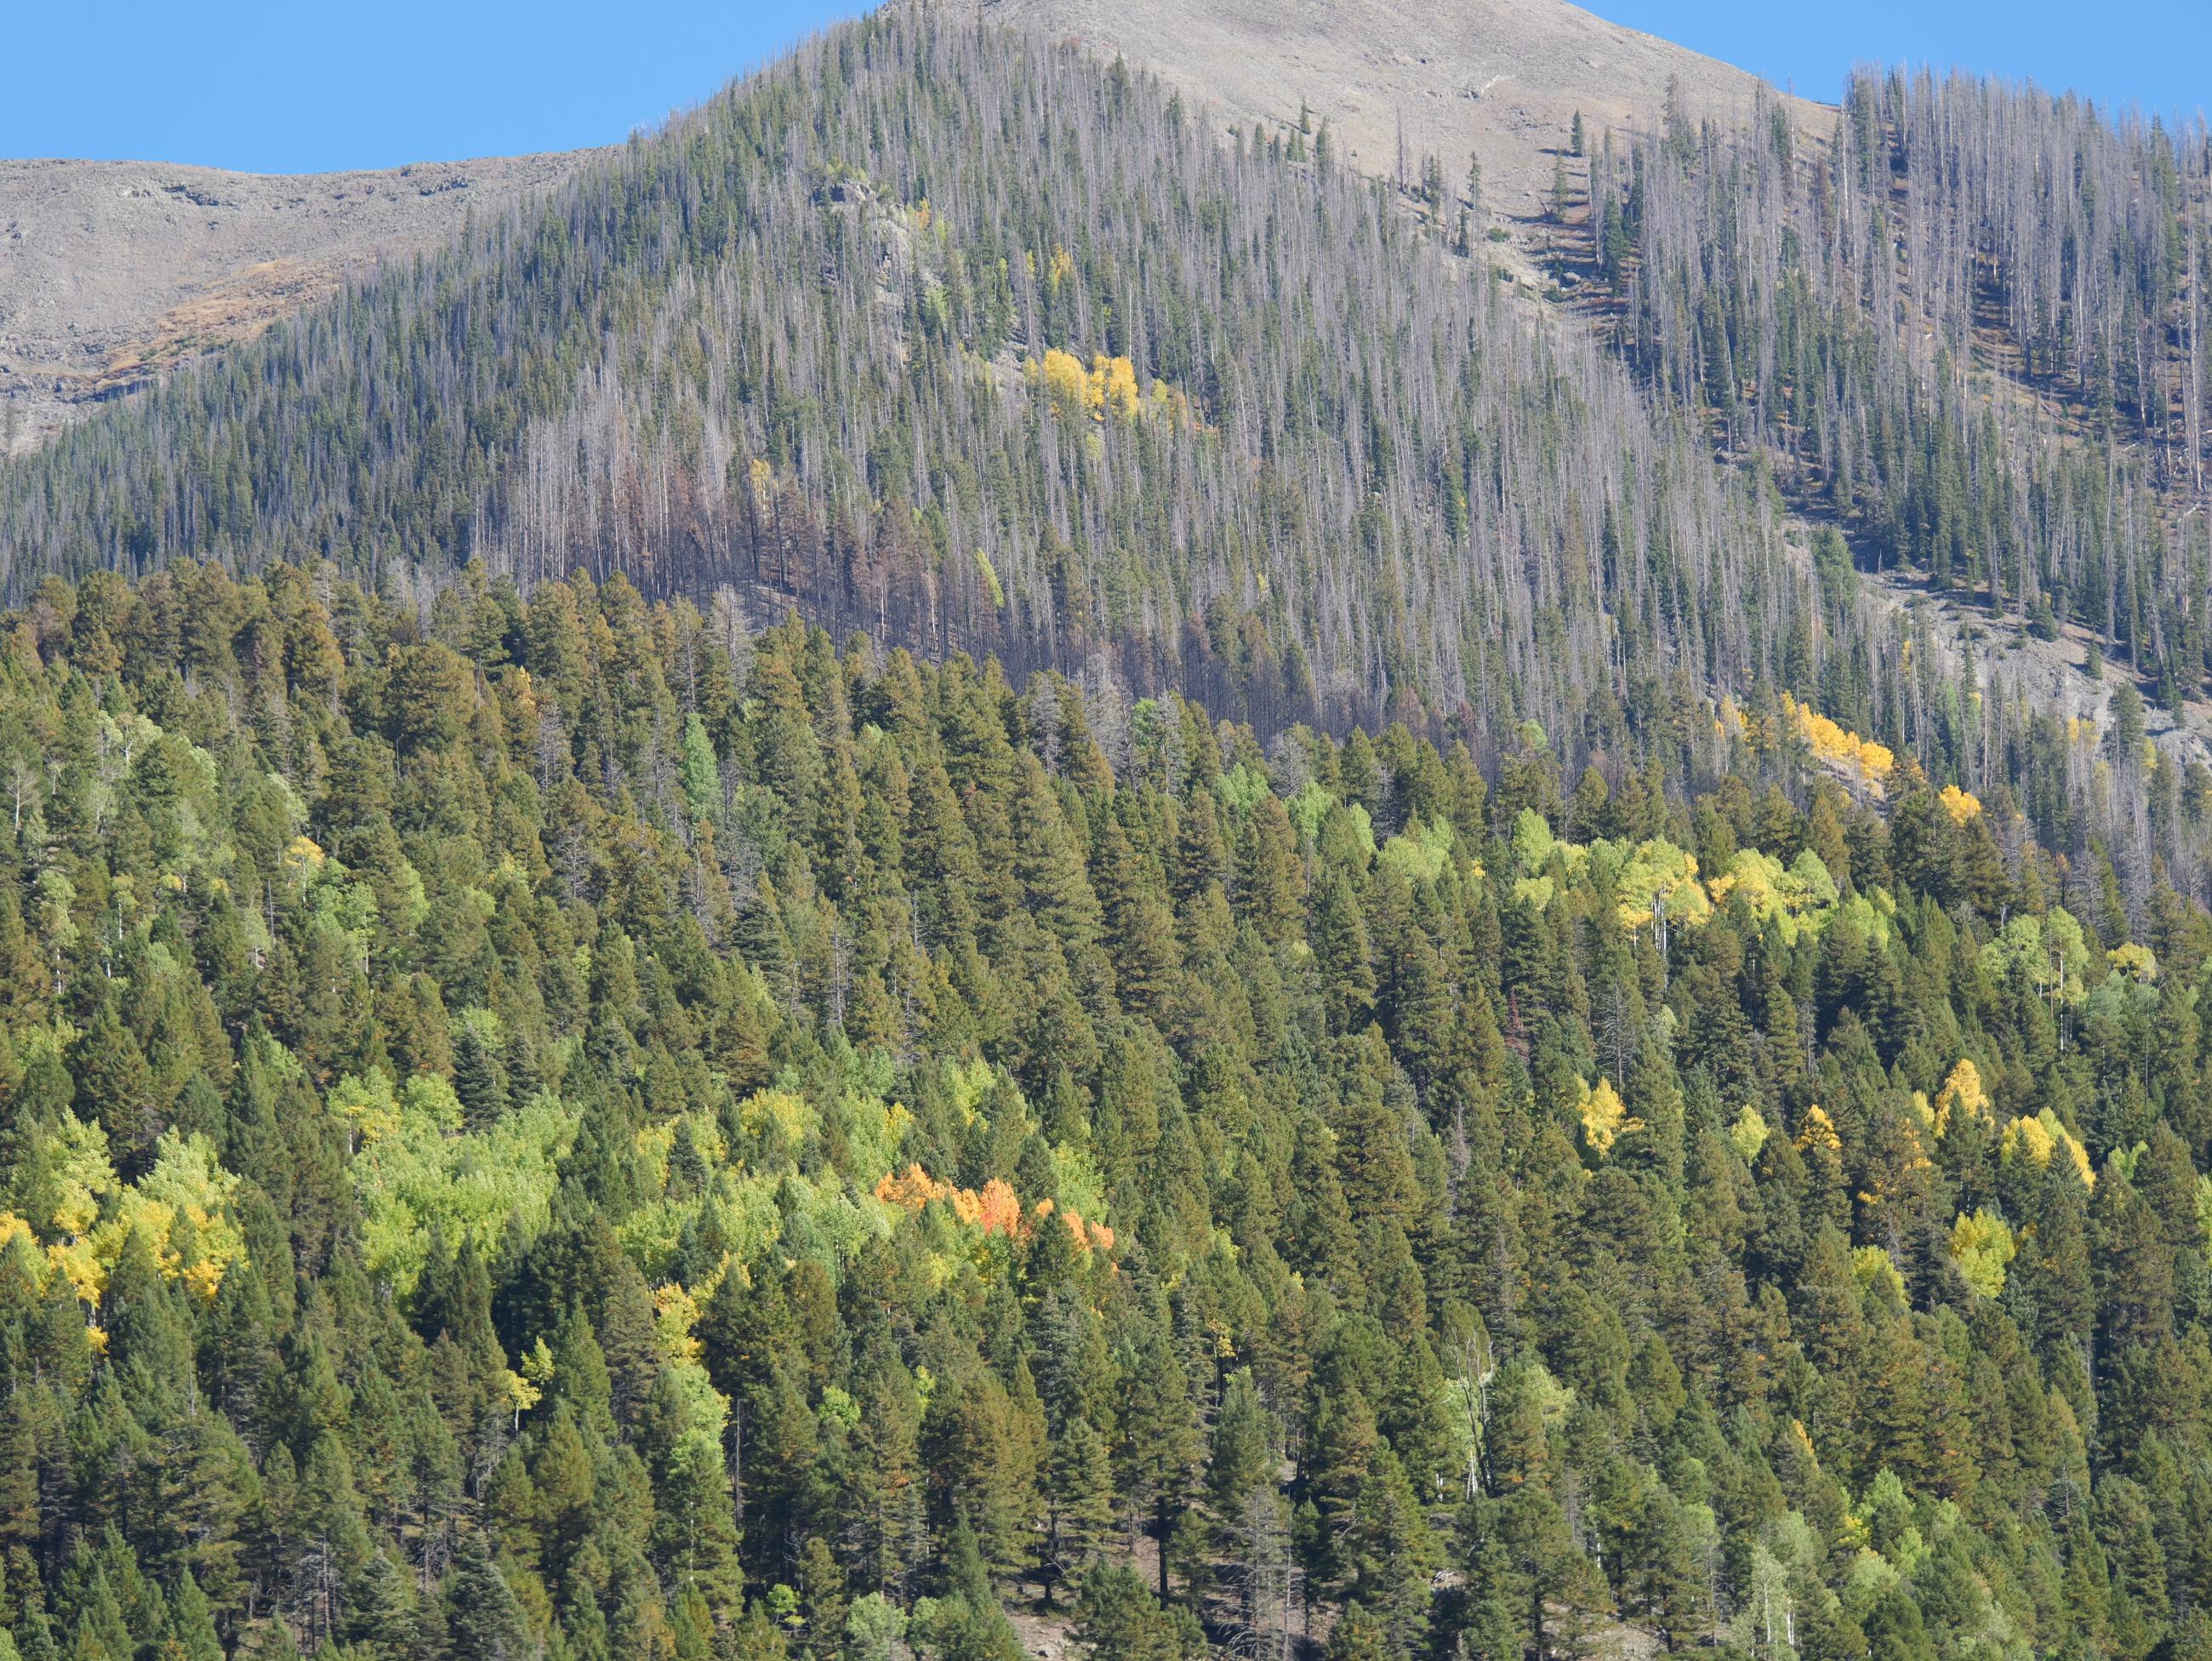 Photo shows the mosaic pattern of the Quartz Ridge Fire. Some sections of trees were burned, while others were not.